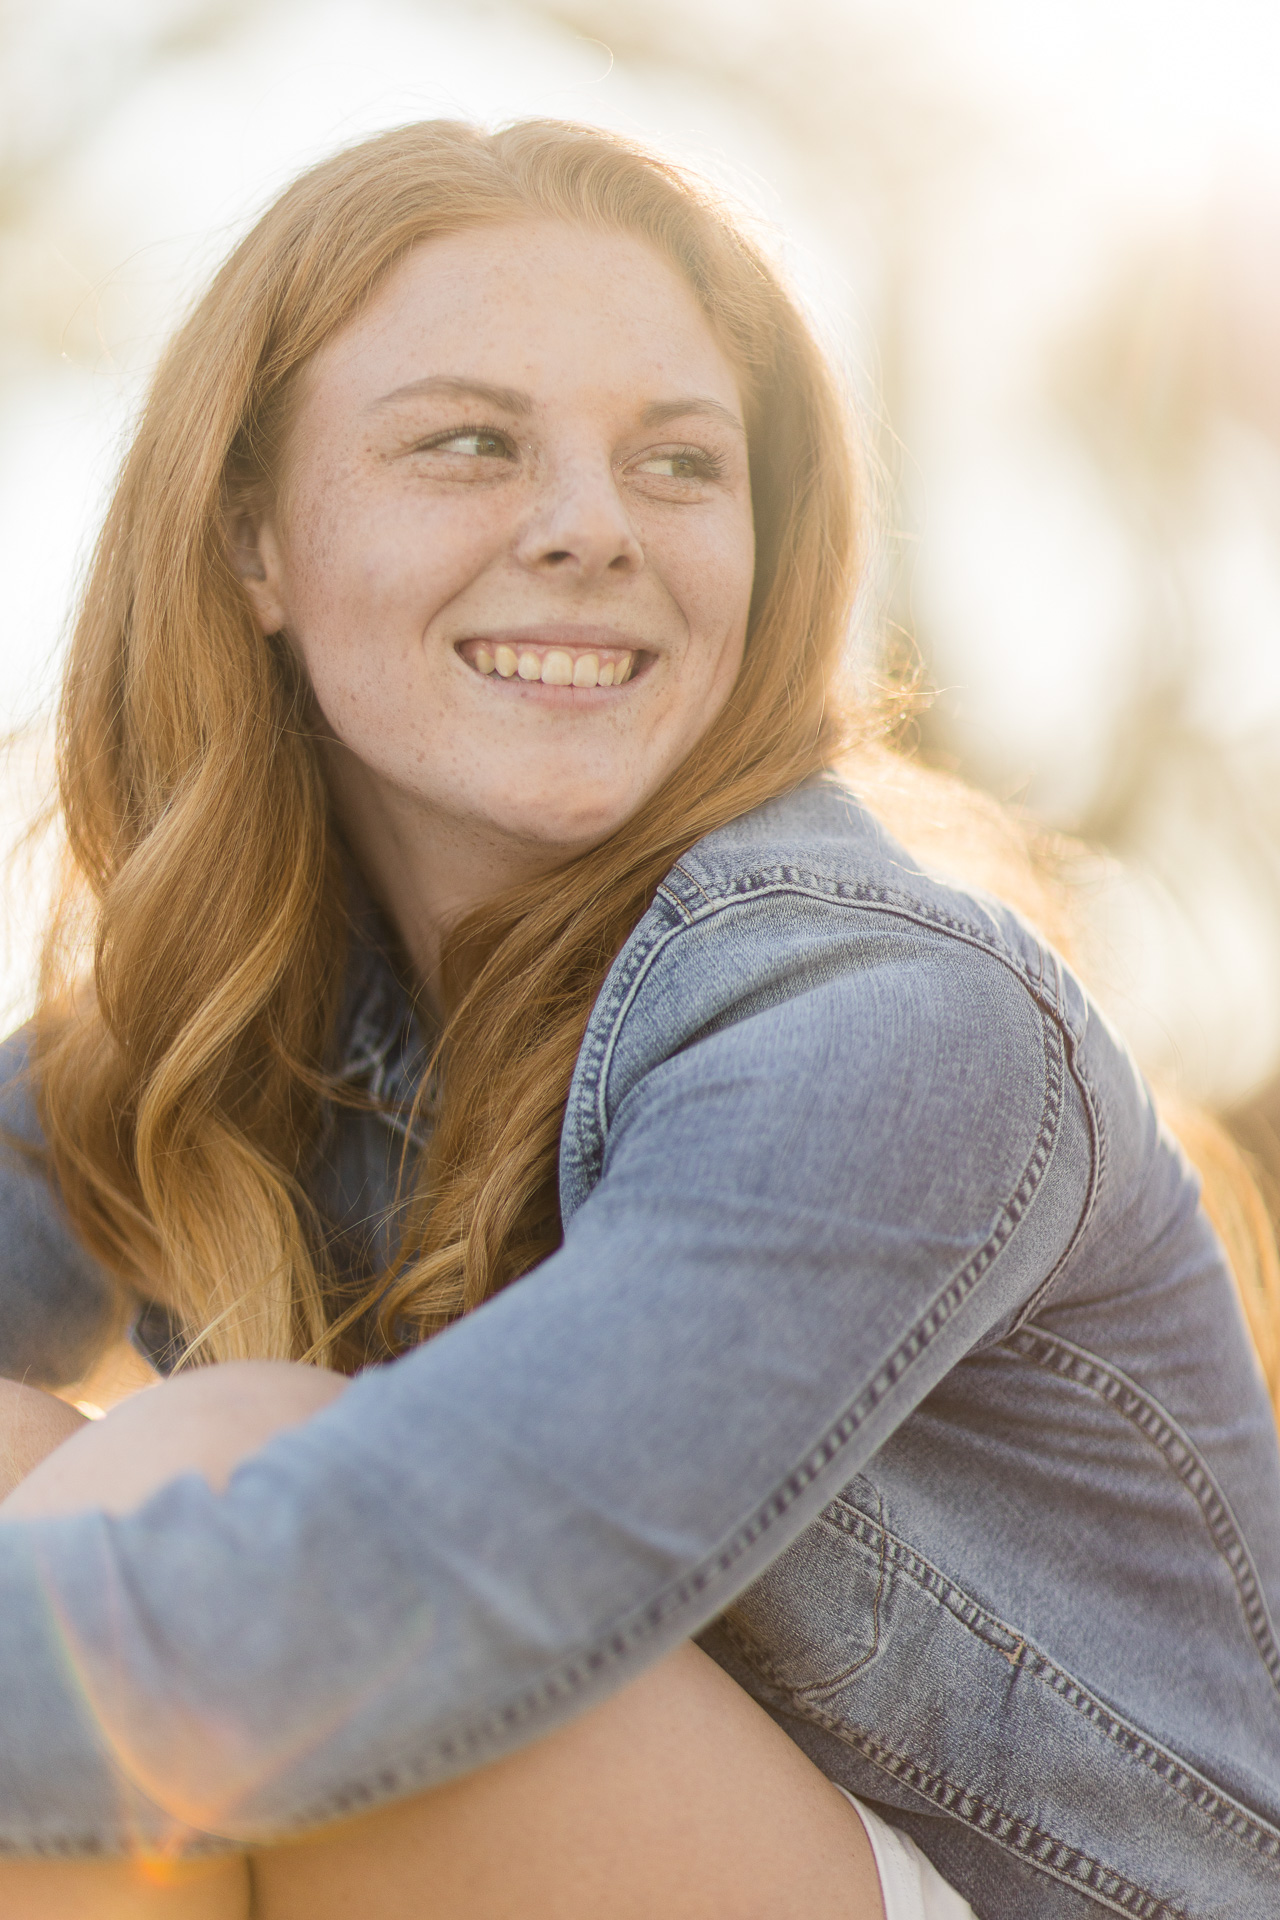 female redhead high school senior sitting while looking away from camera during sunset